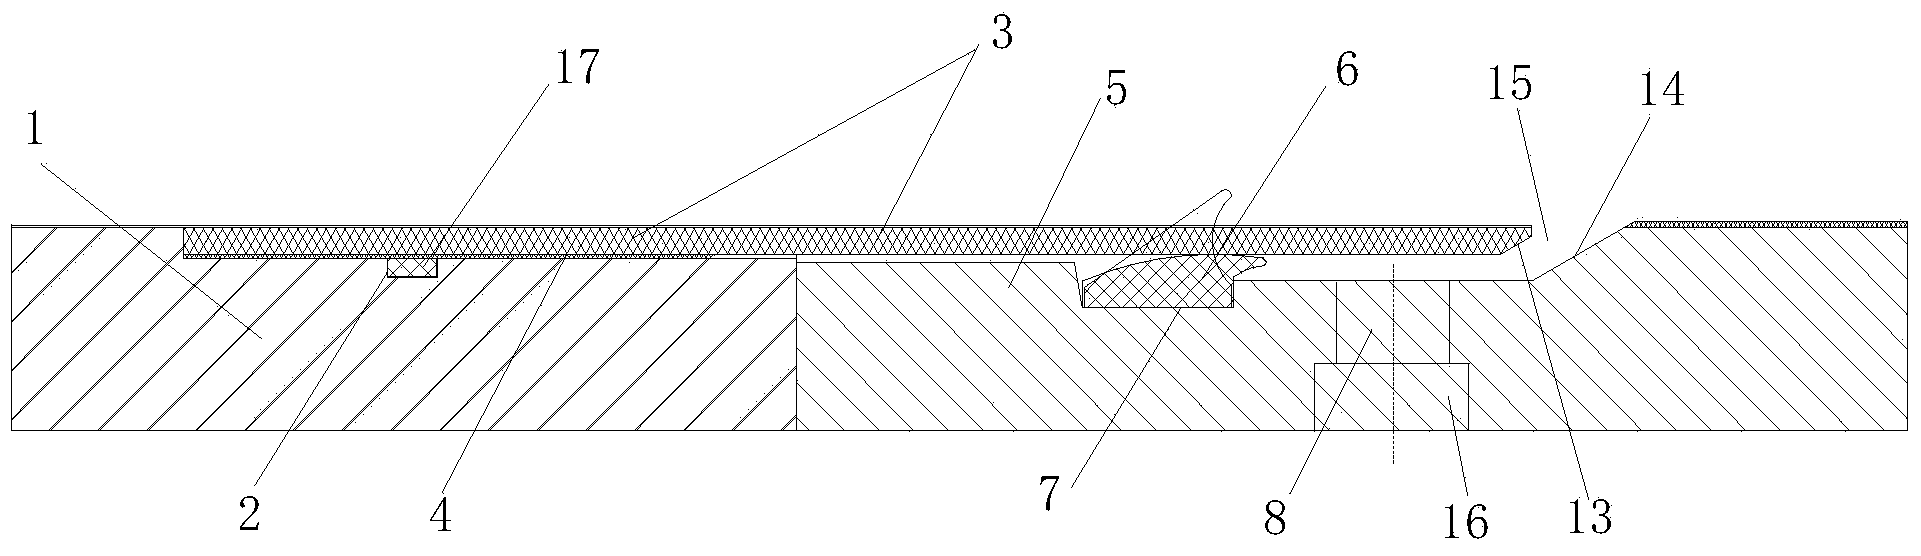 Glass fiber reinforced plastics pipeline sealing sleeve connector and a machining method thereof